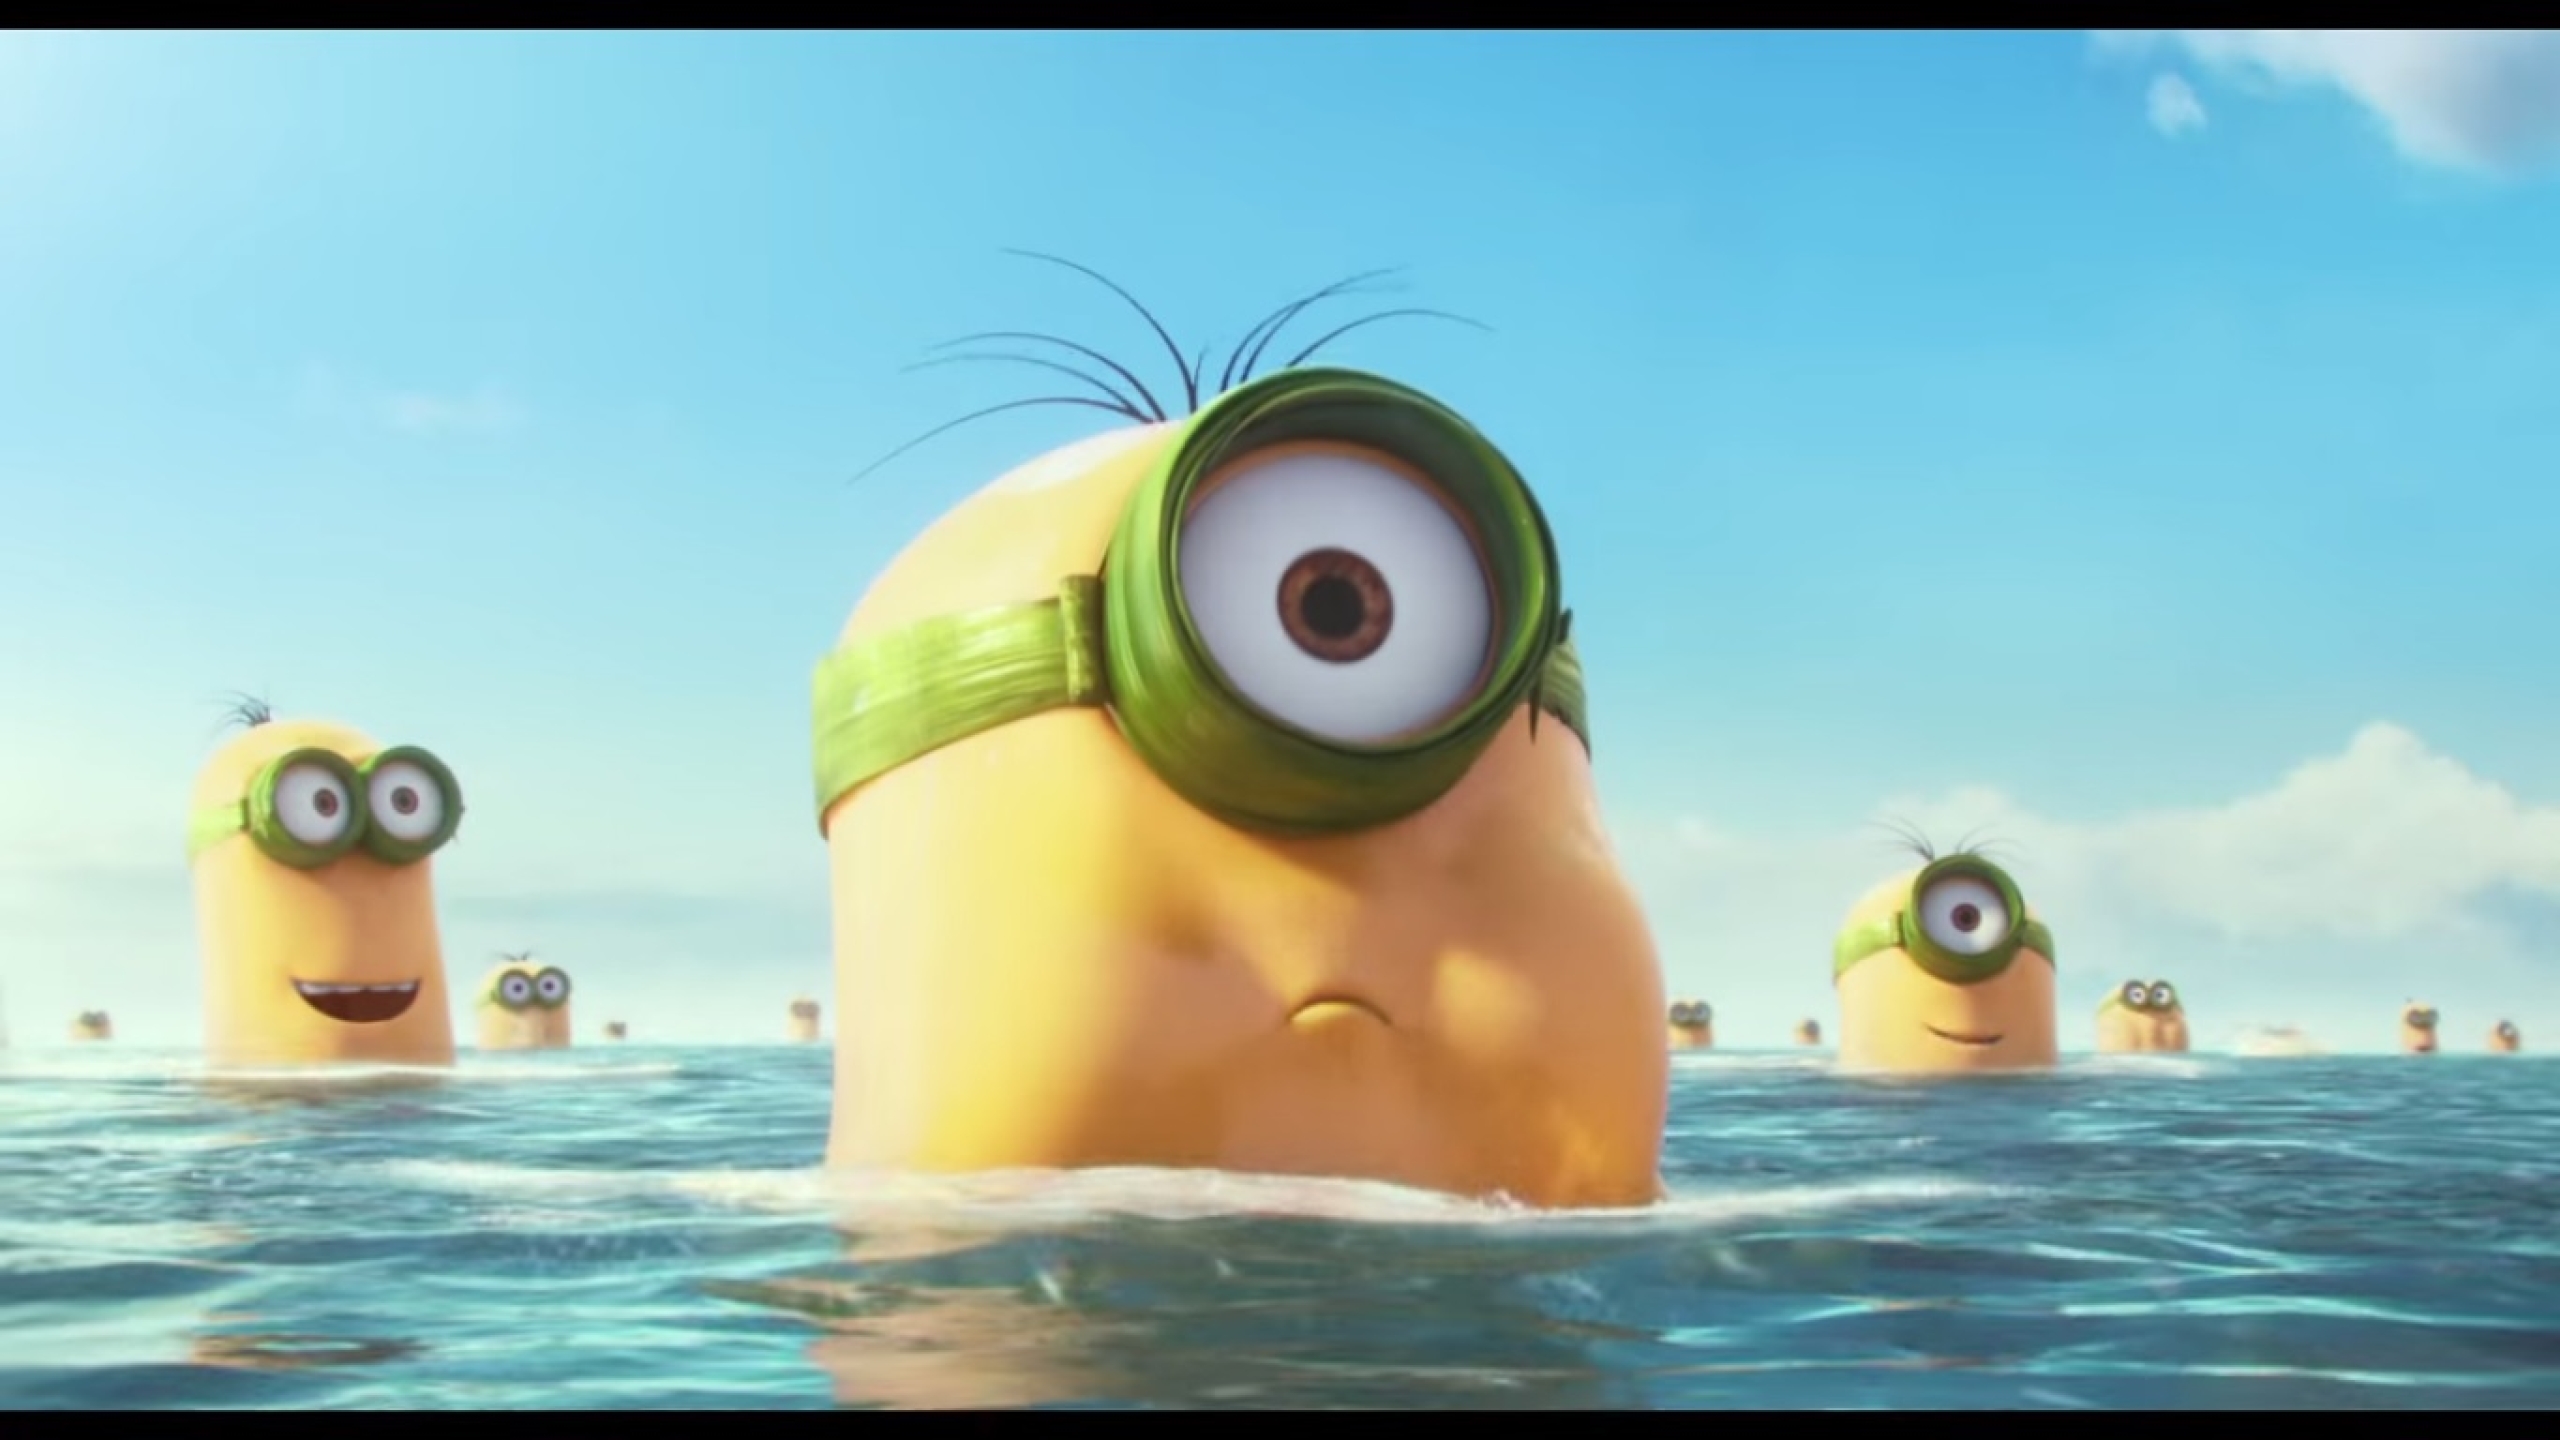 2560x1440 Minions 15 Hd Wallpapers 1440p Resolution Wallpaper Hd Movies 4k Wallpapers Images Photos And Background Wallpapers Den